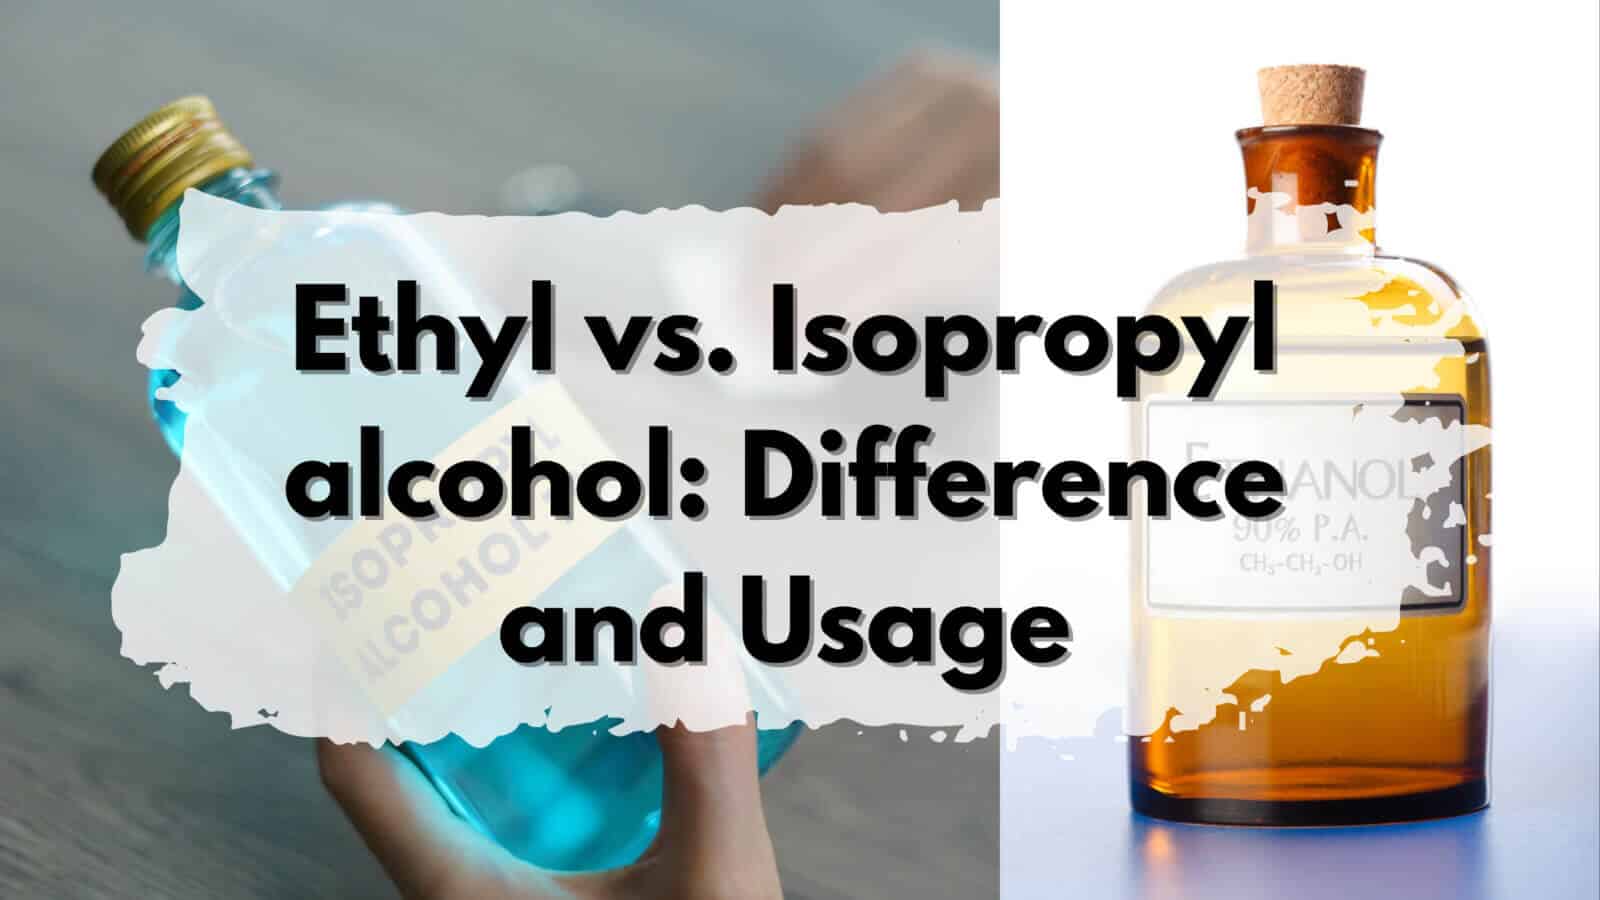 Alcohol: Difference and Usage